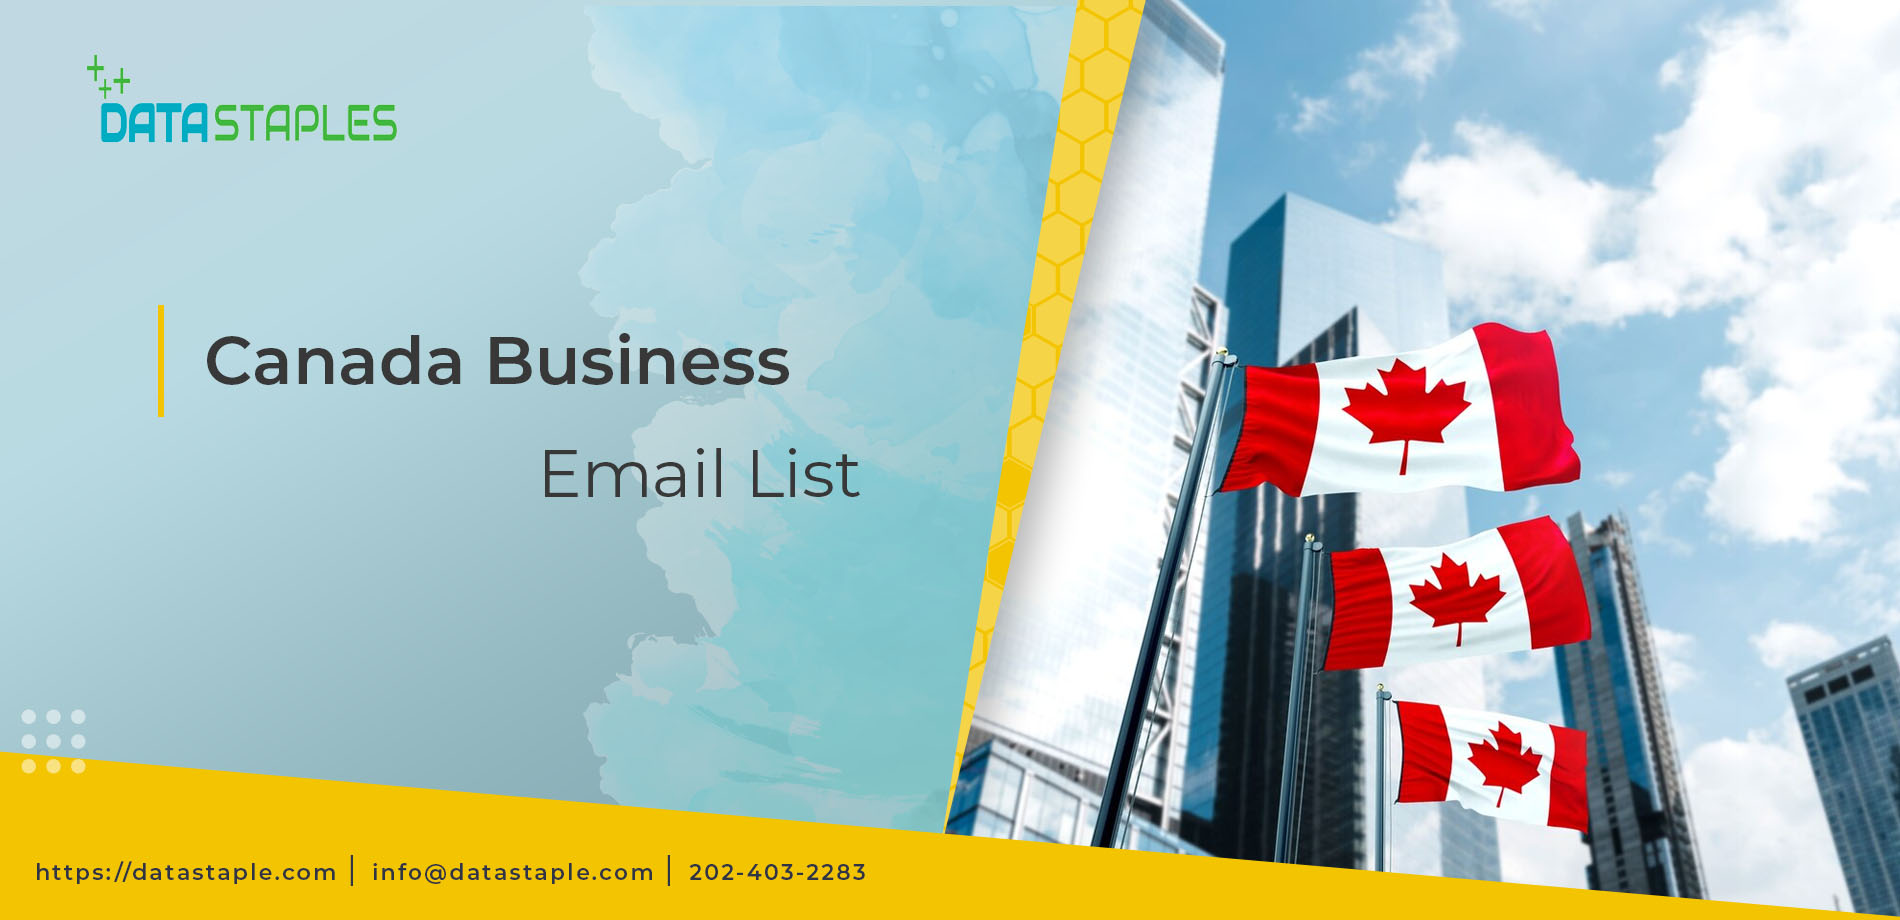 Canada Business Email List | DataStaples